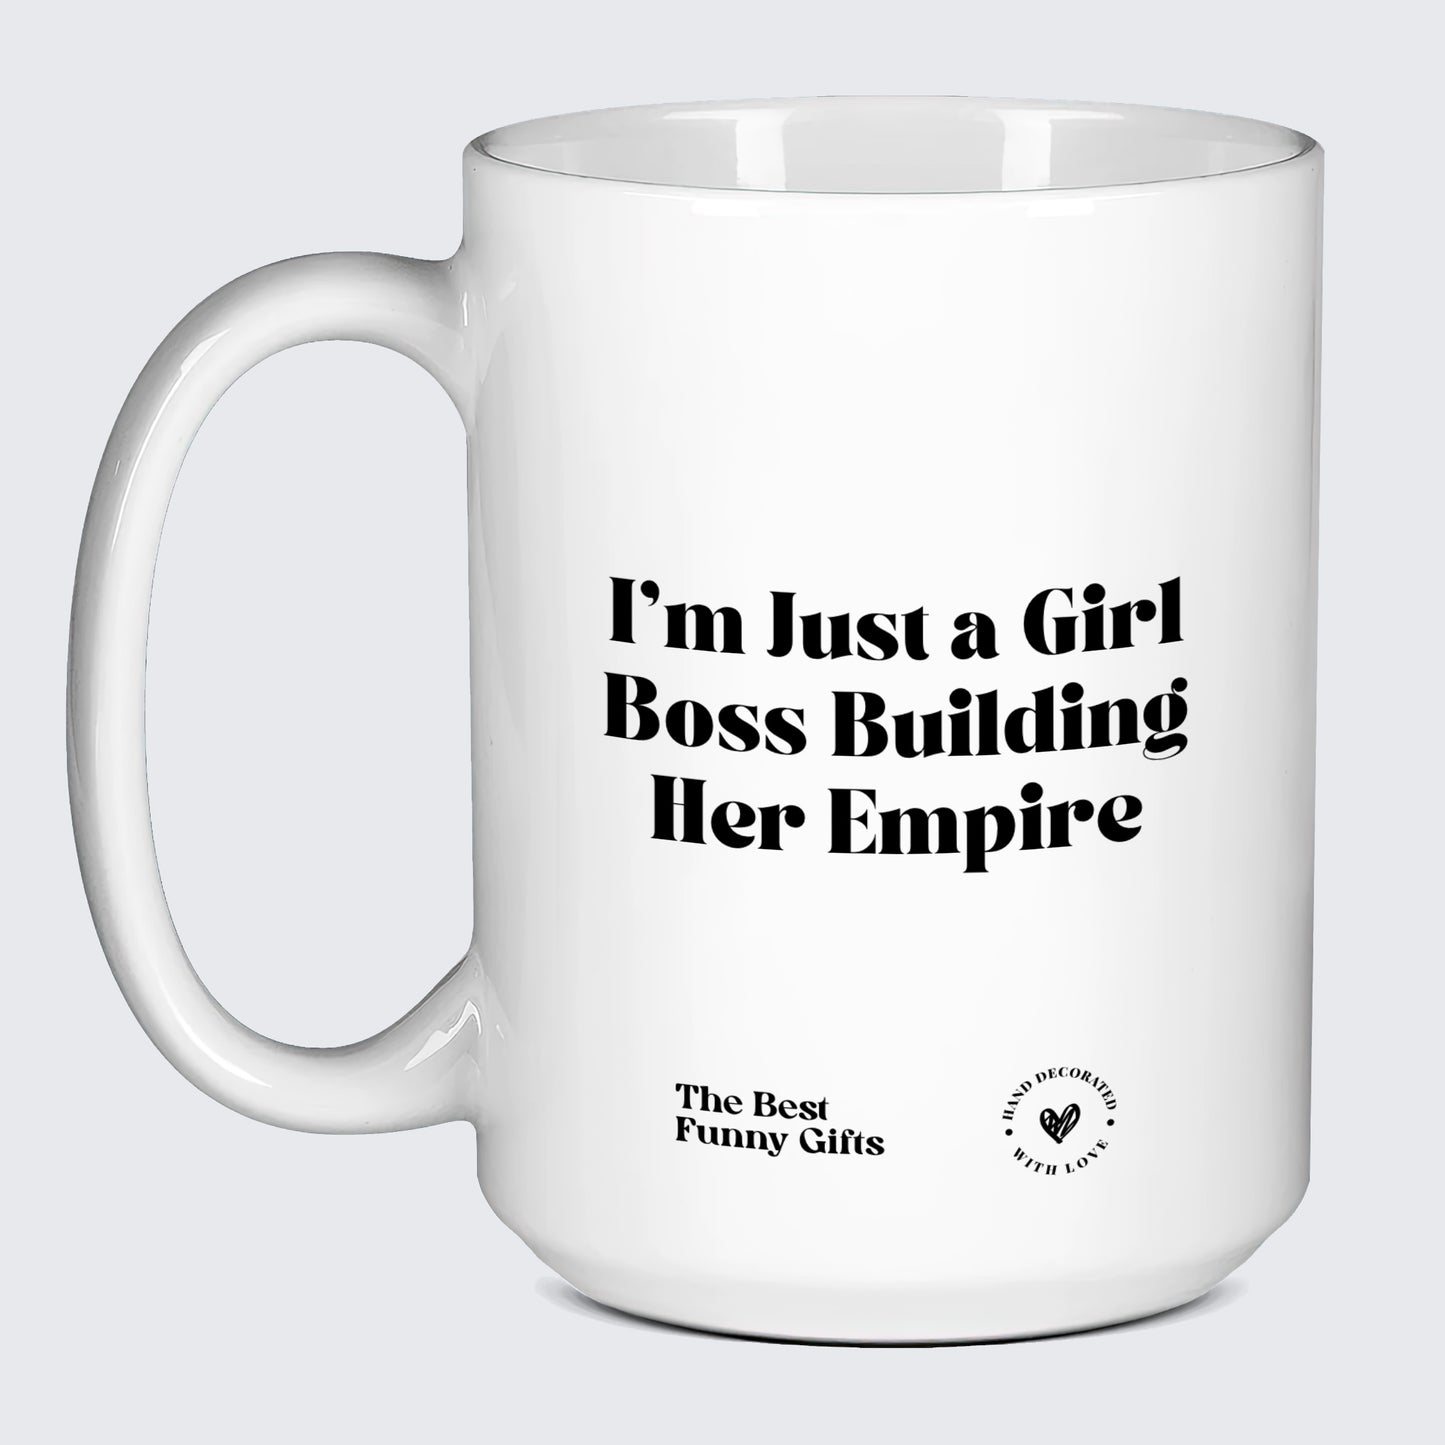 Cute Mugs I'm Just a Girl Boss Building Her Empire - The Best Funny Gifts